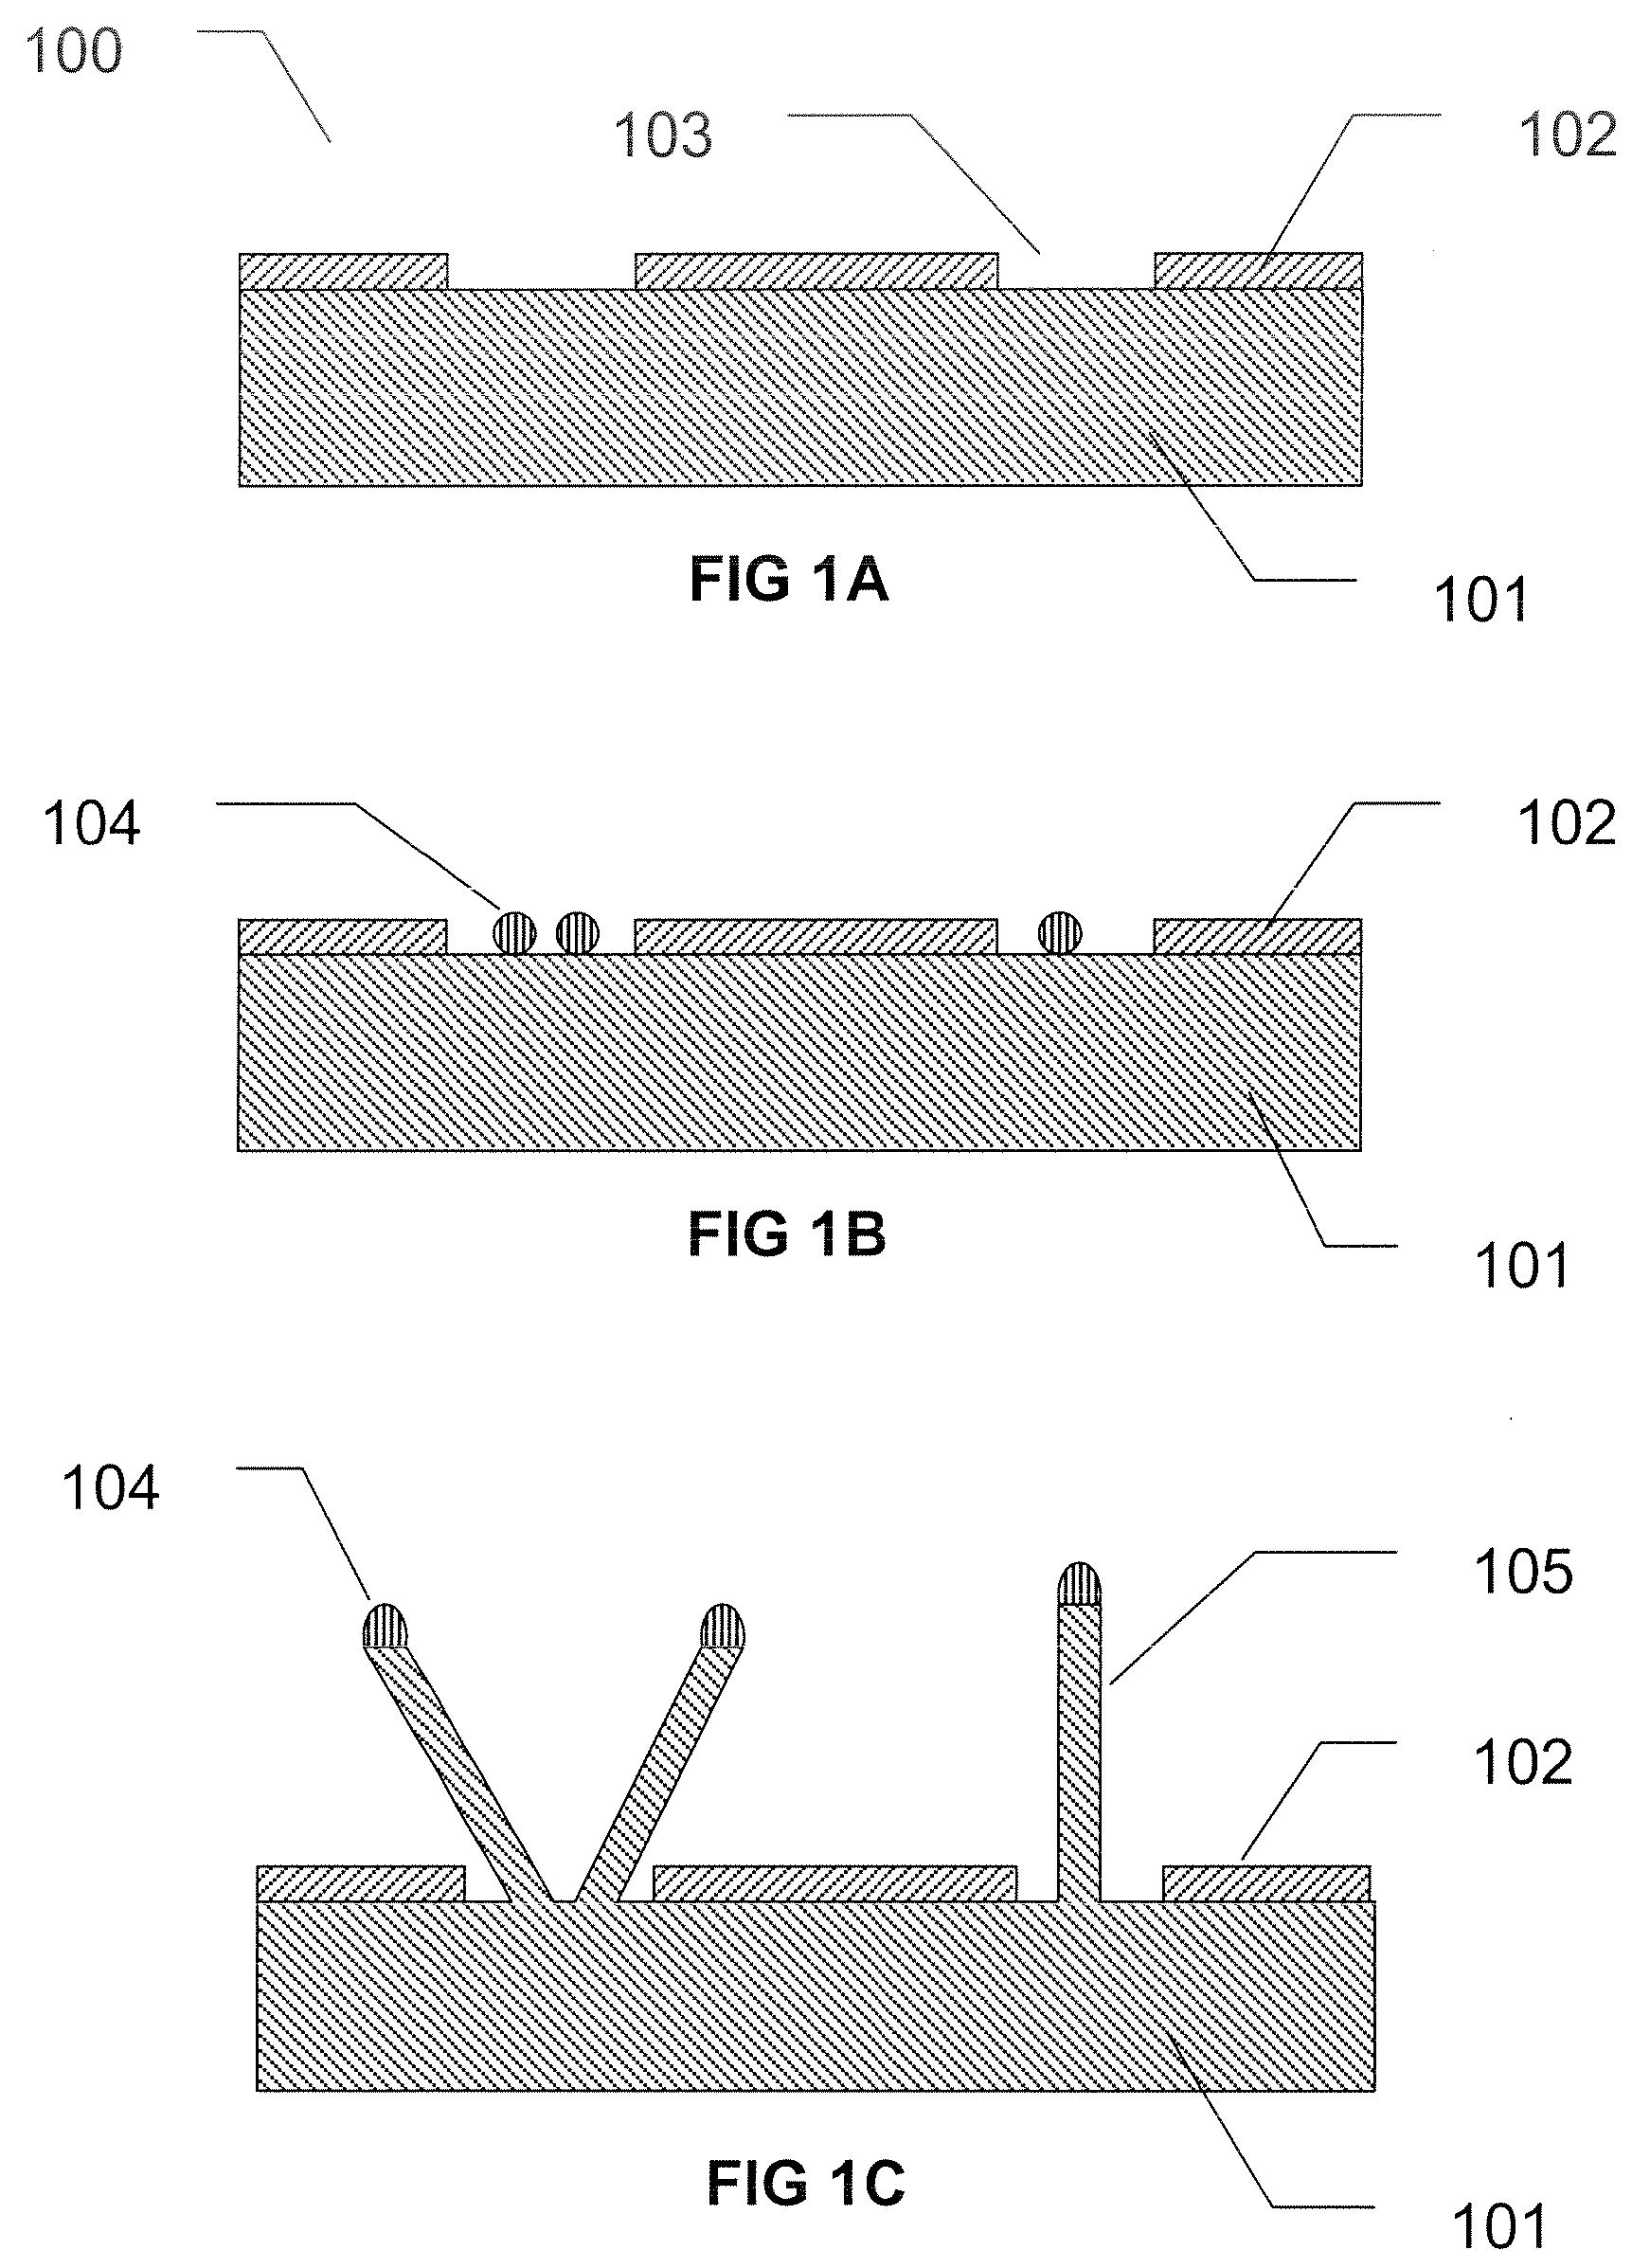 Self-aligned epitaxial growth of semiconductor nanowires